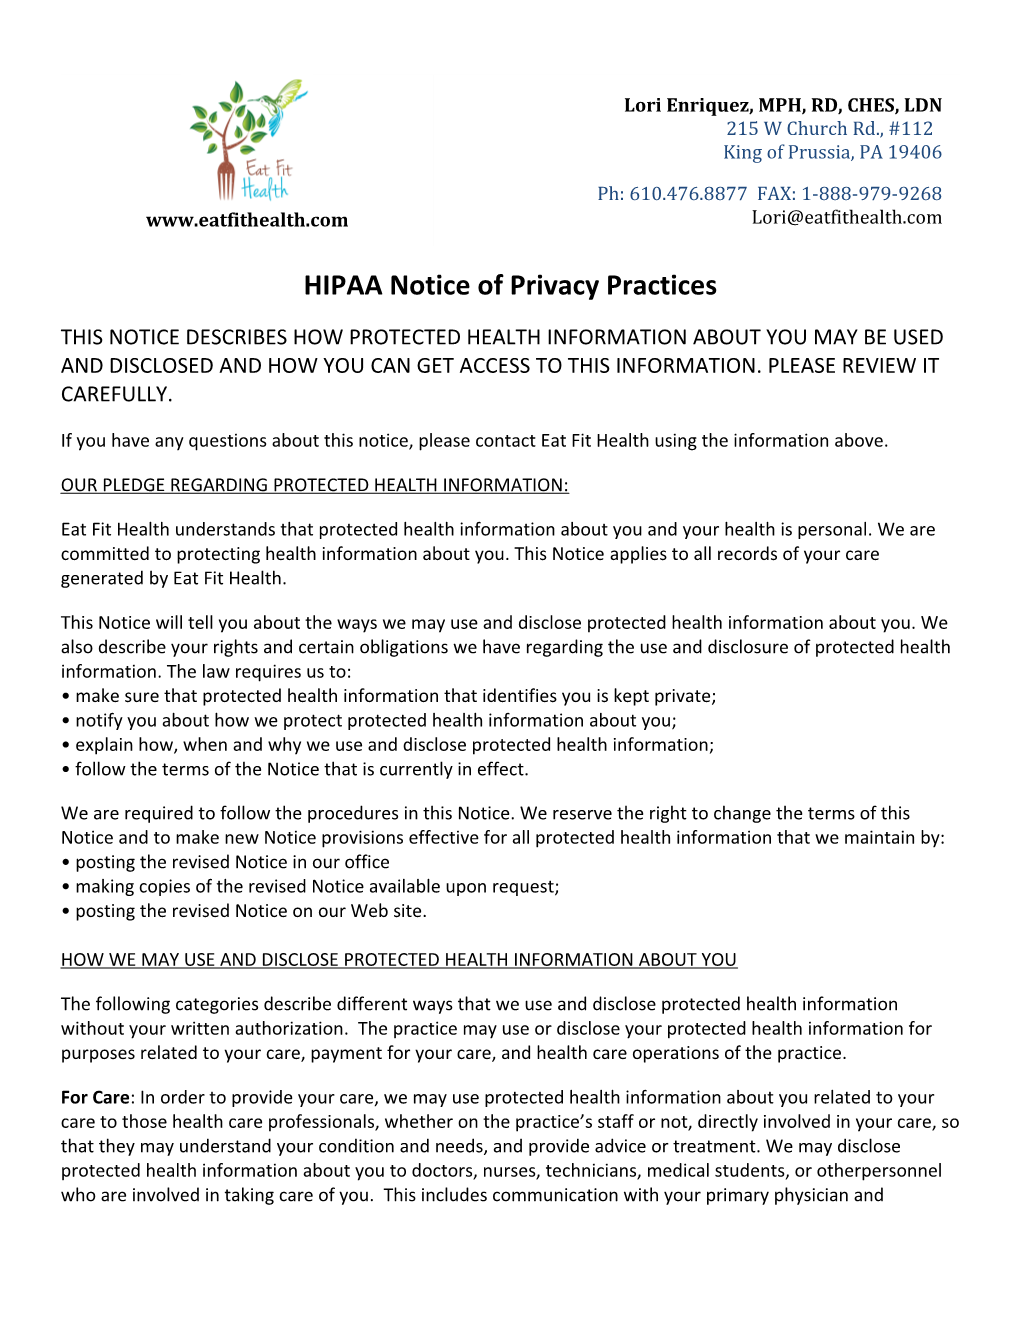 HIPAA Notice of Privacy Practices (Continued) 1 ______